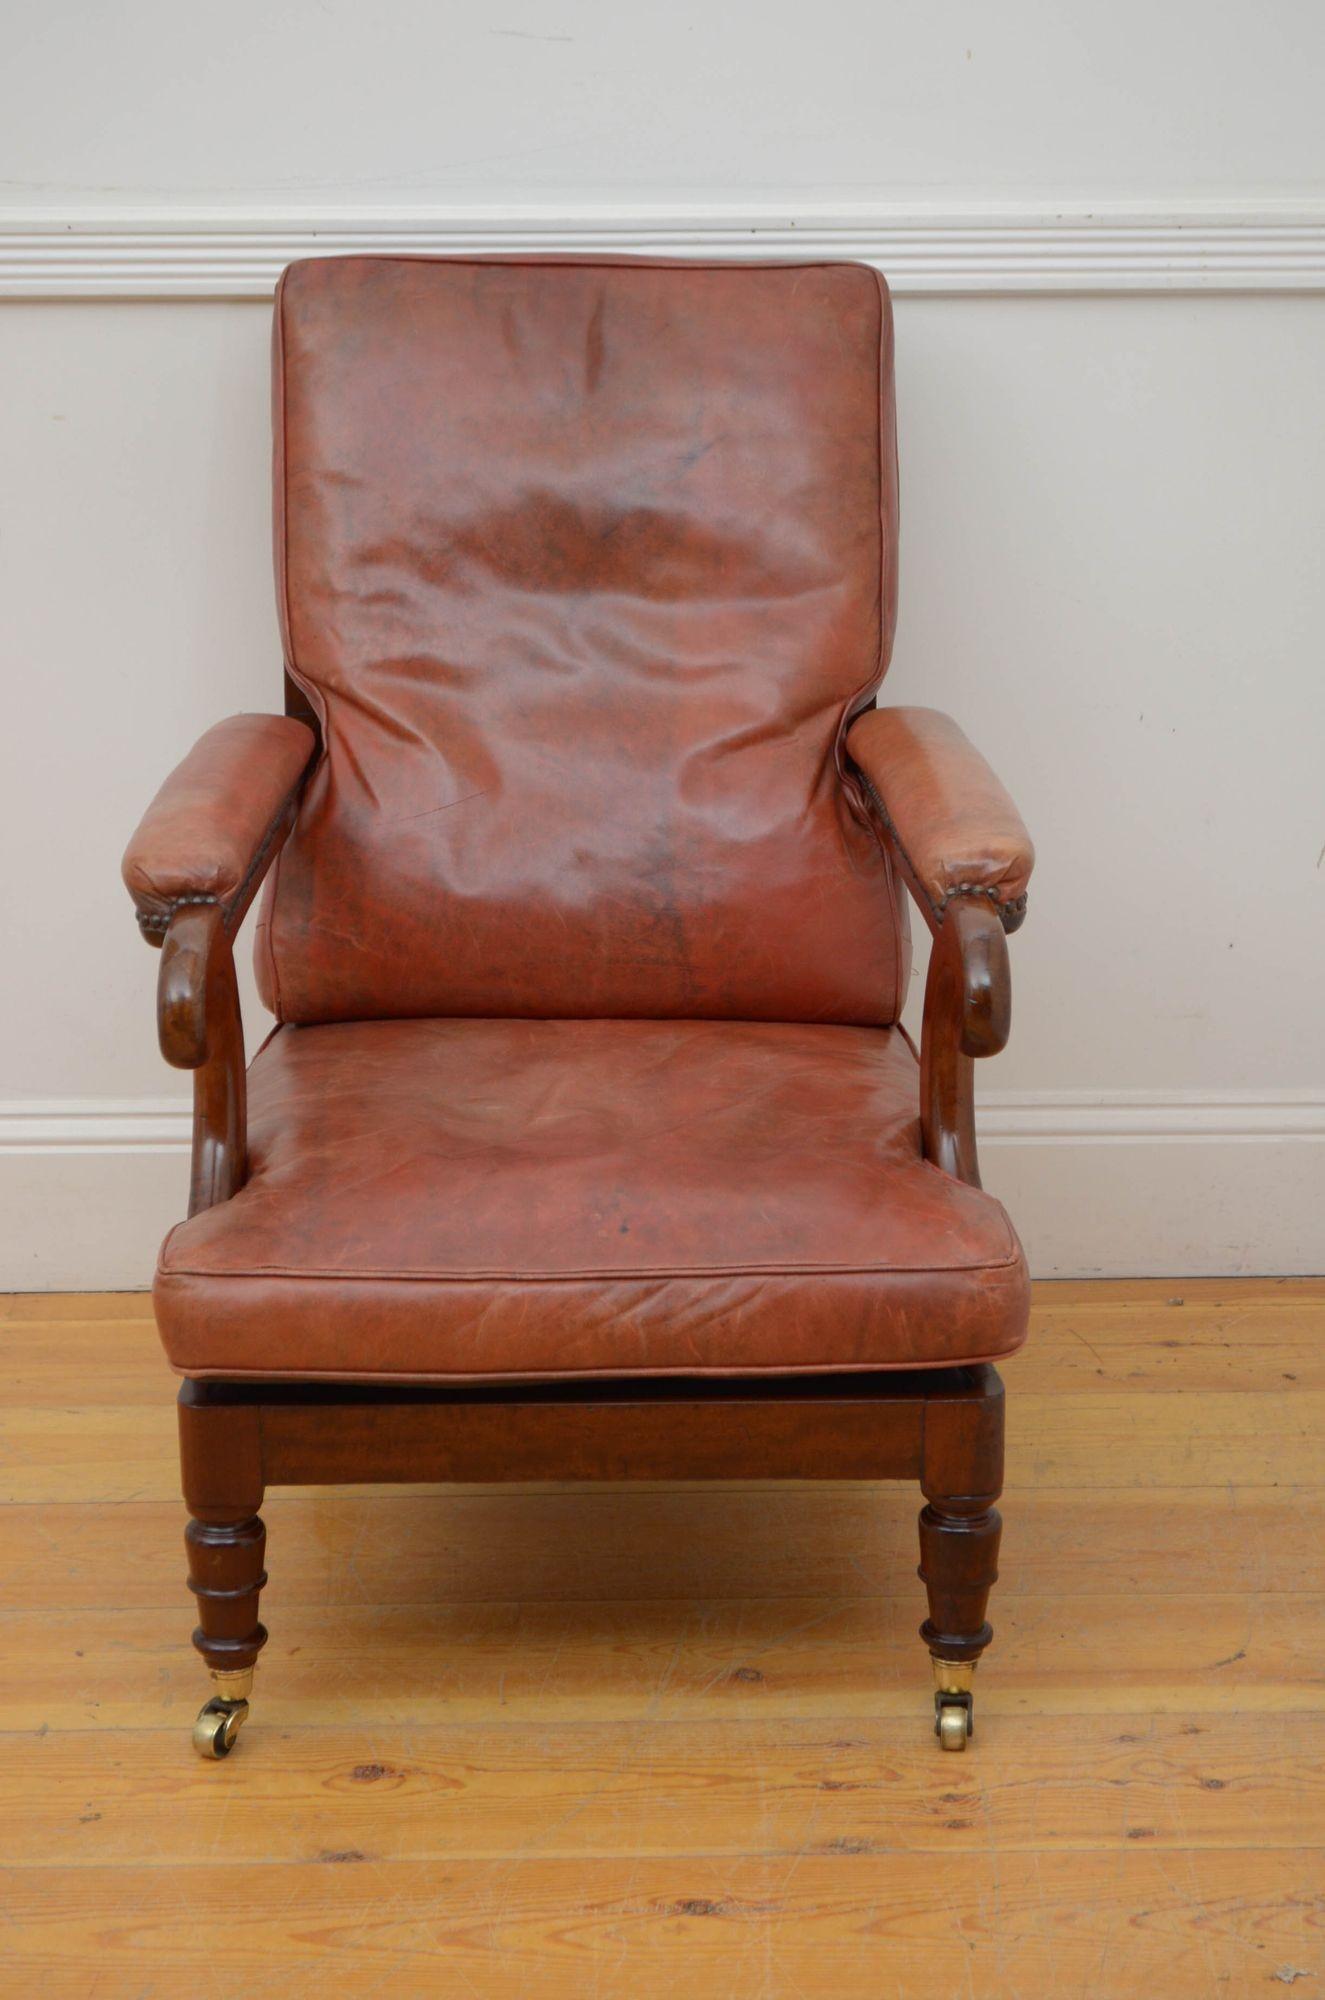 A05 Fine quality Georgian mahogany library chair, having caned back with marron leather cushion, generous seat and leather padded scroll arms, all standing on turned legs terminating in brass castors. This antique armchair came from a private